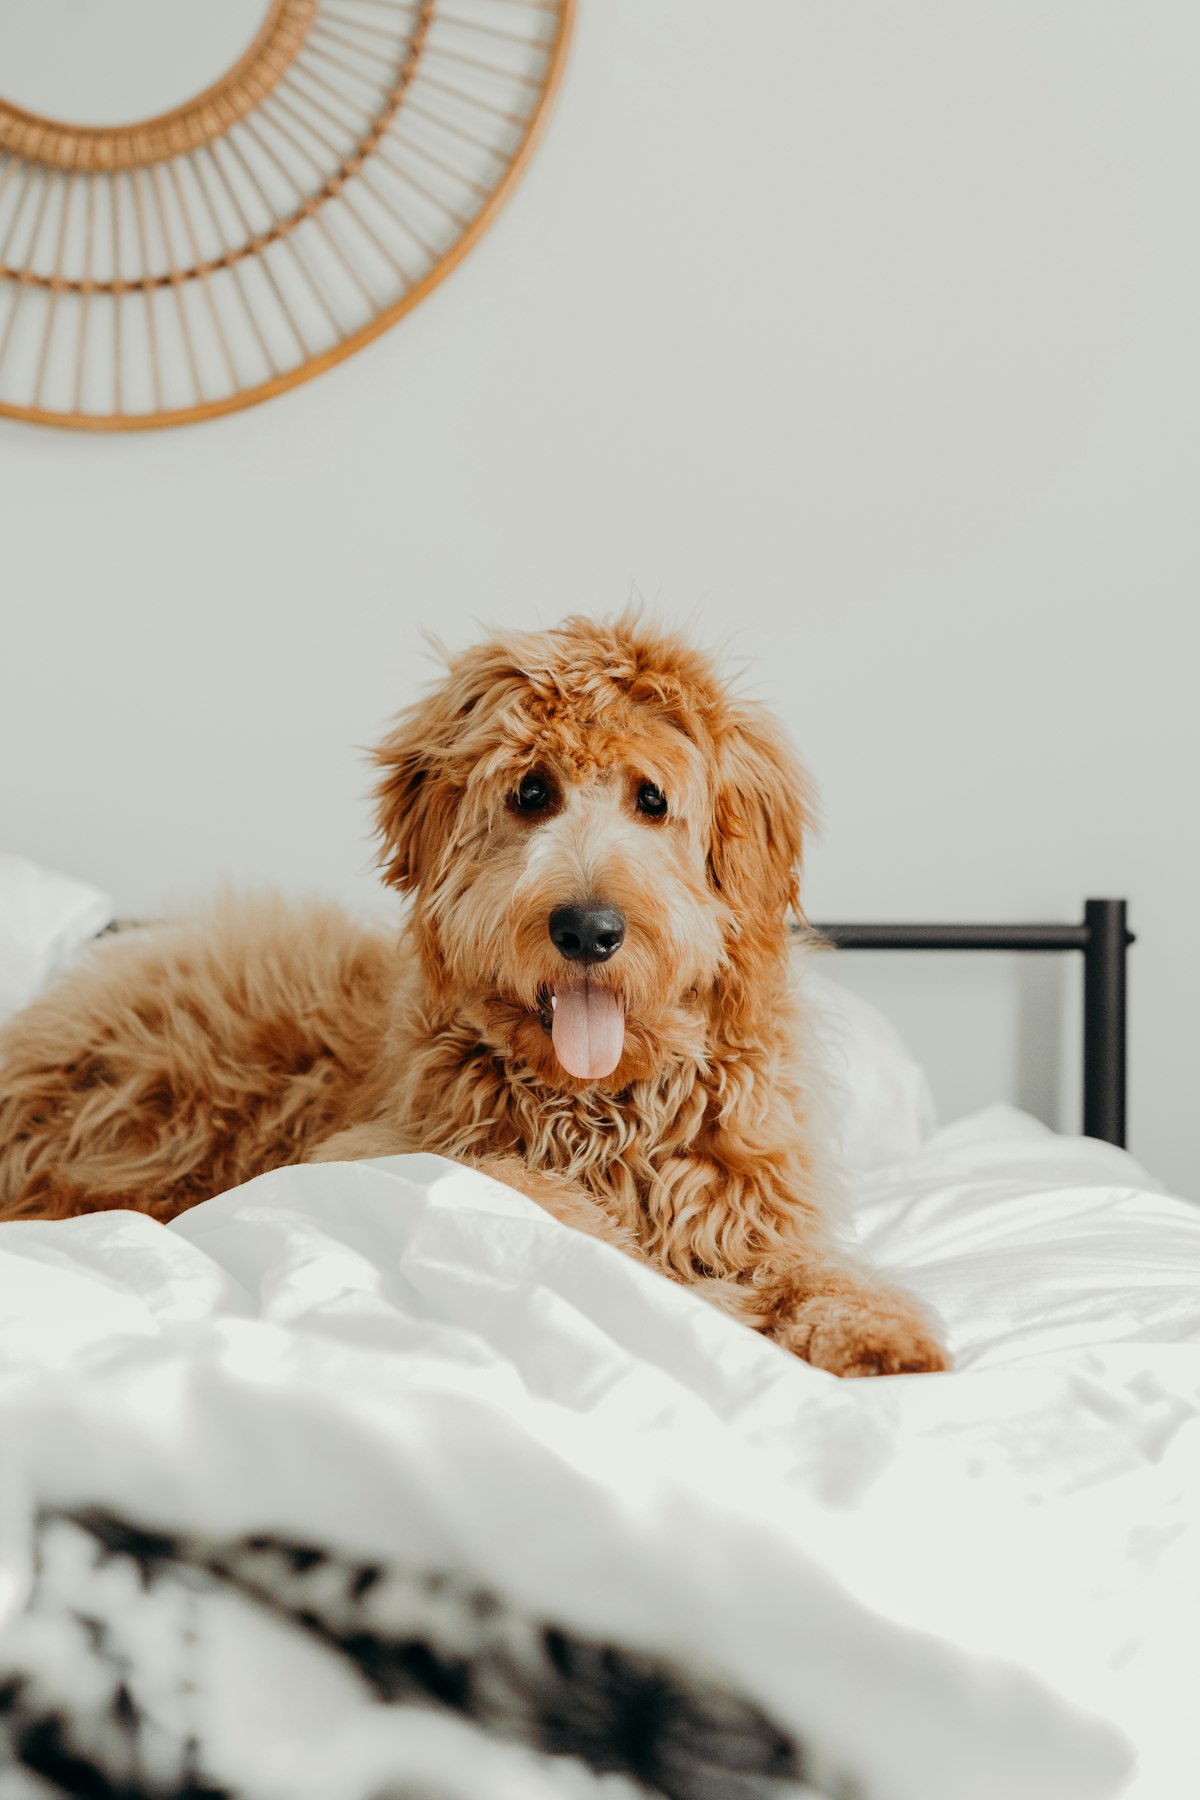 The Don'ts of Shampooing a Goldendoodle